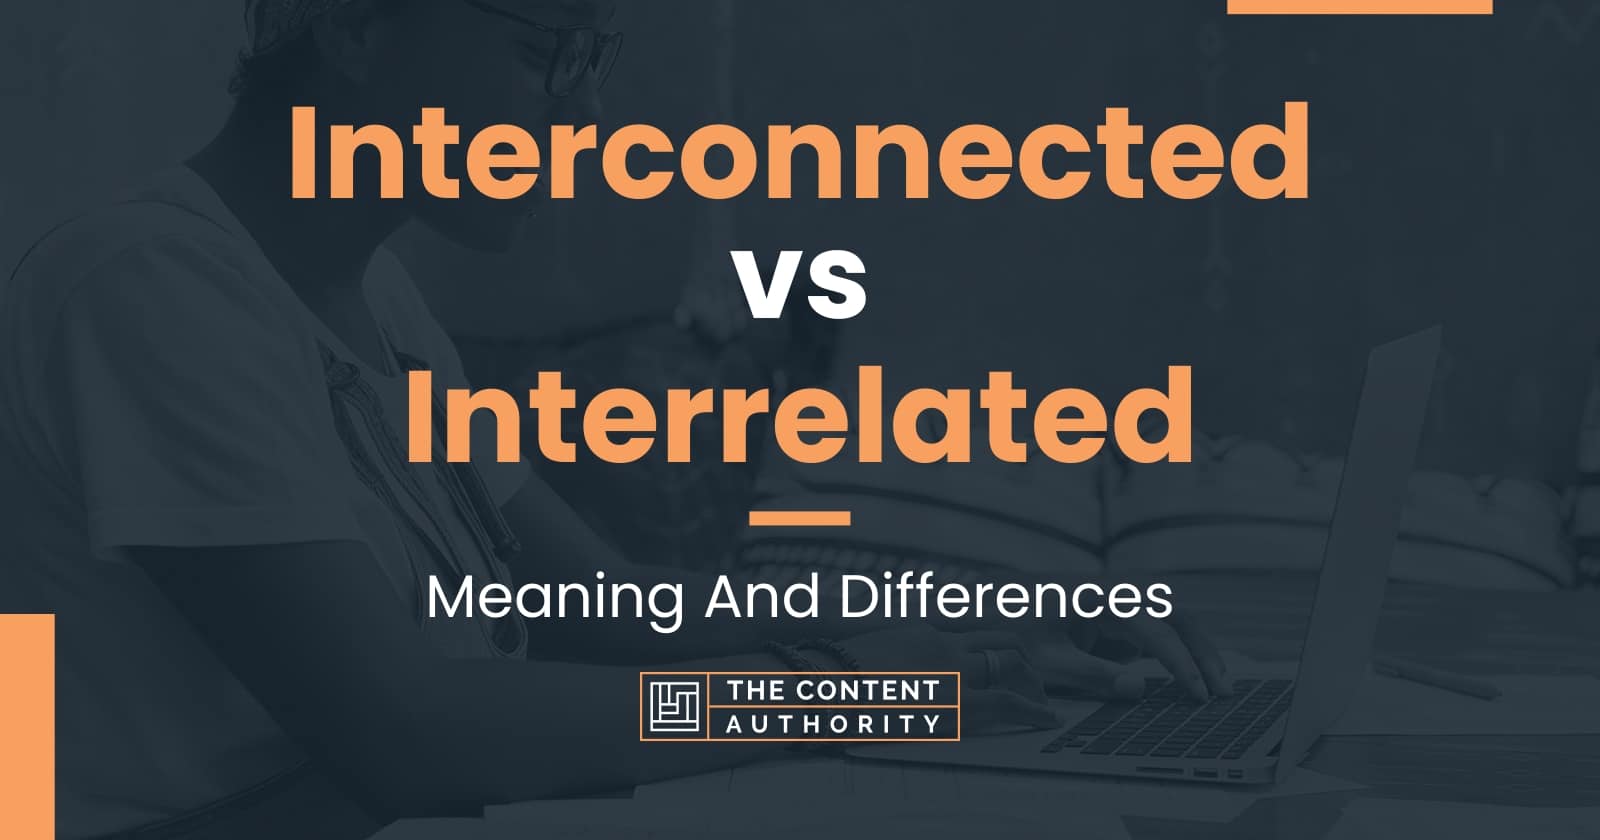 Interconnected vs Interrelated: Meaning And Differences